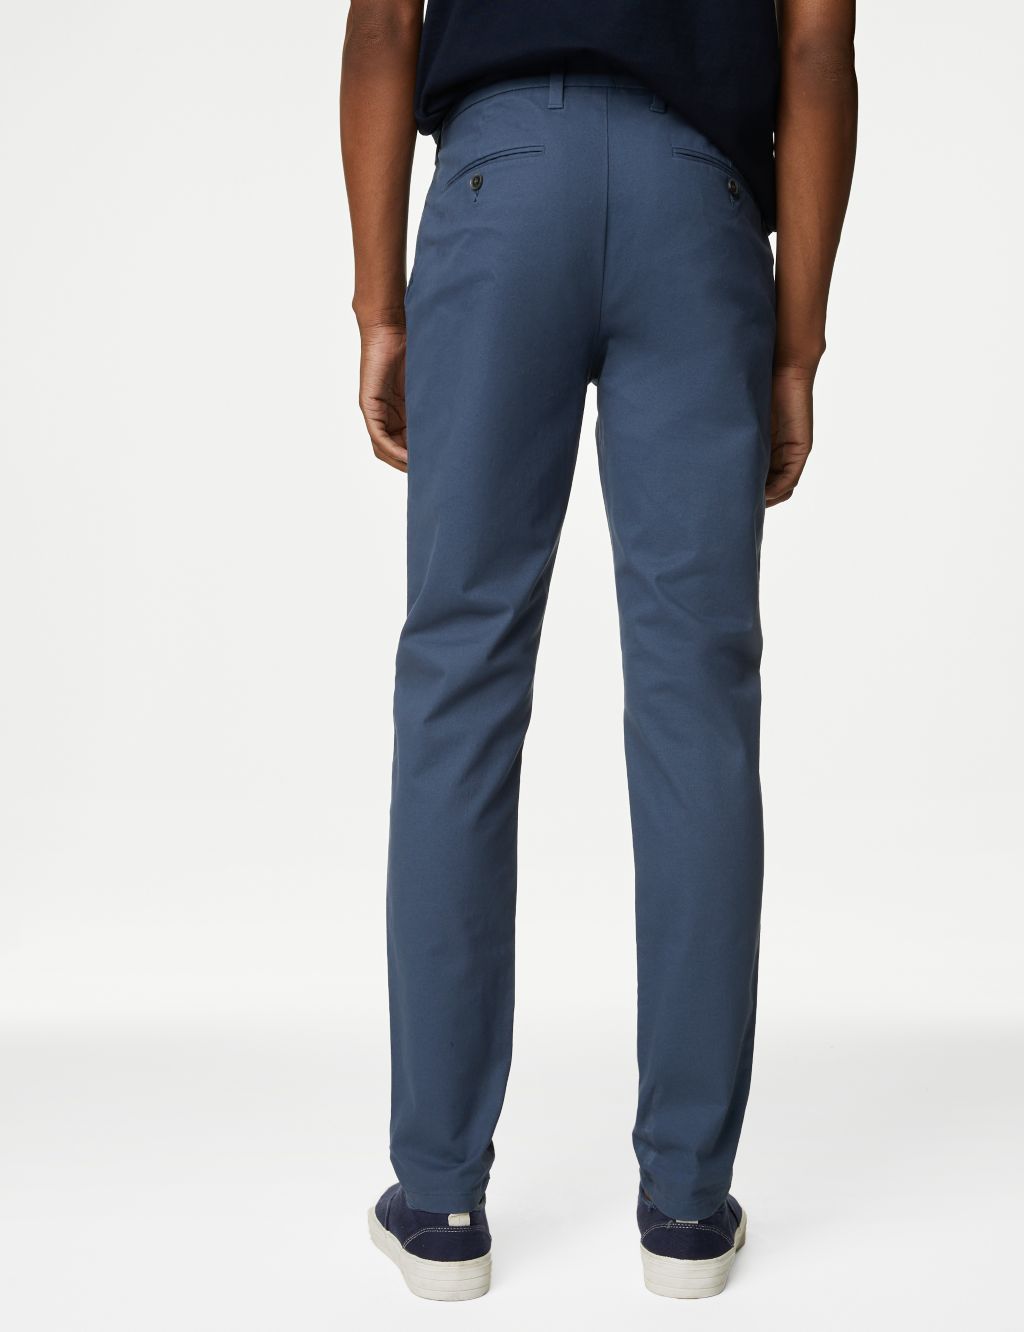 Skinny Fit Stretch Chinos image 5